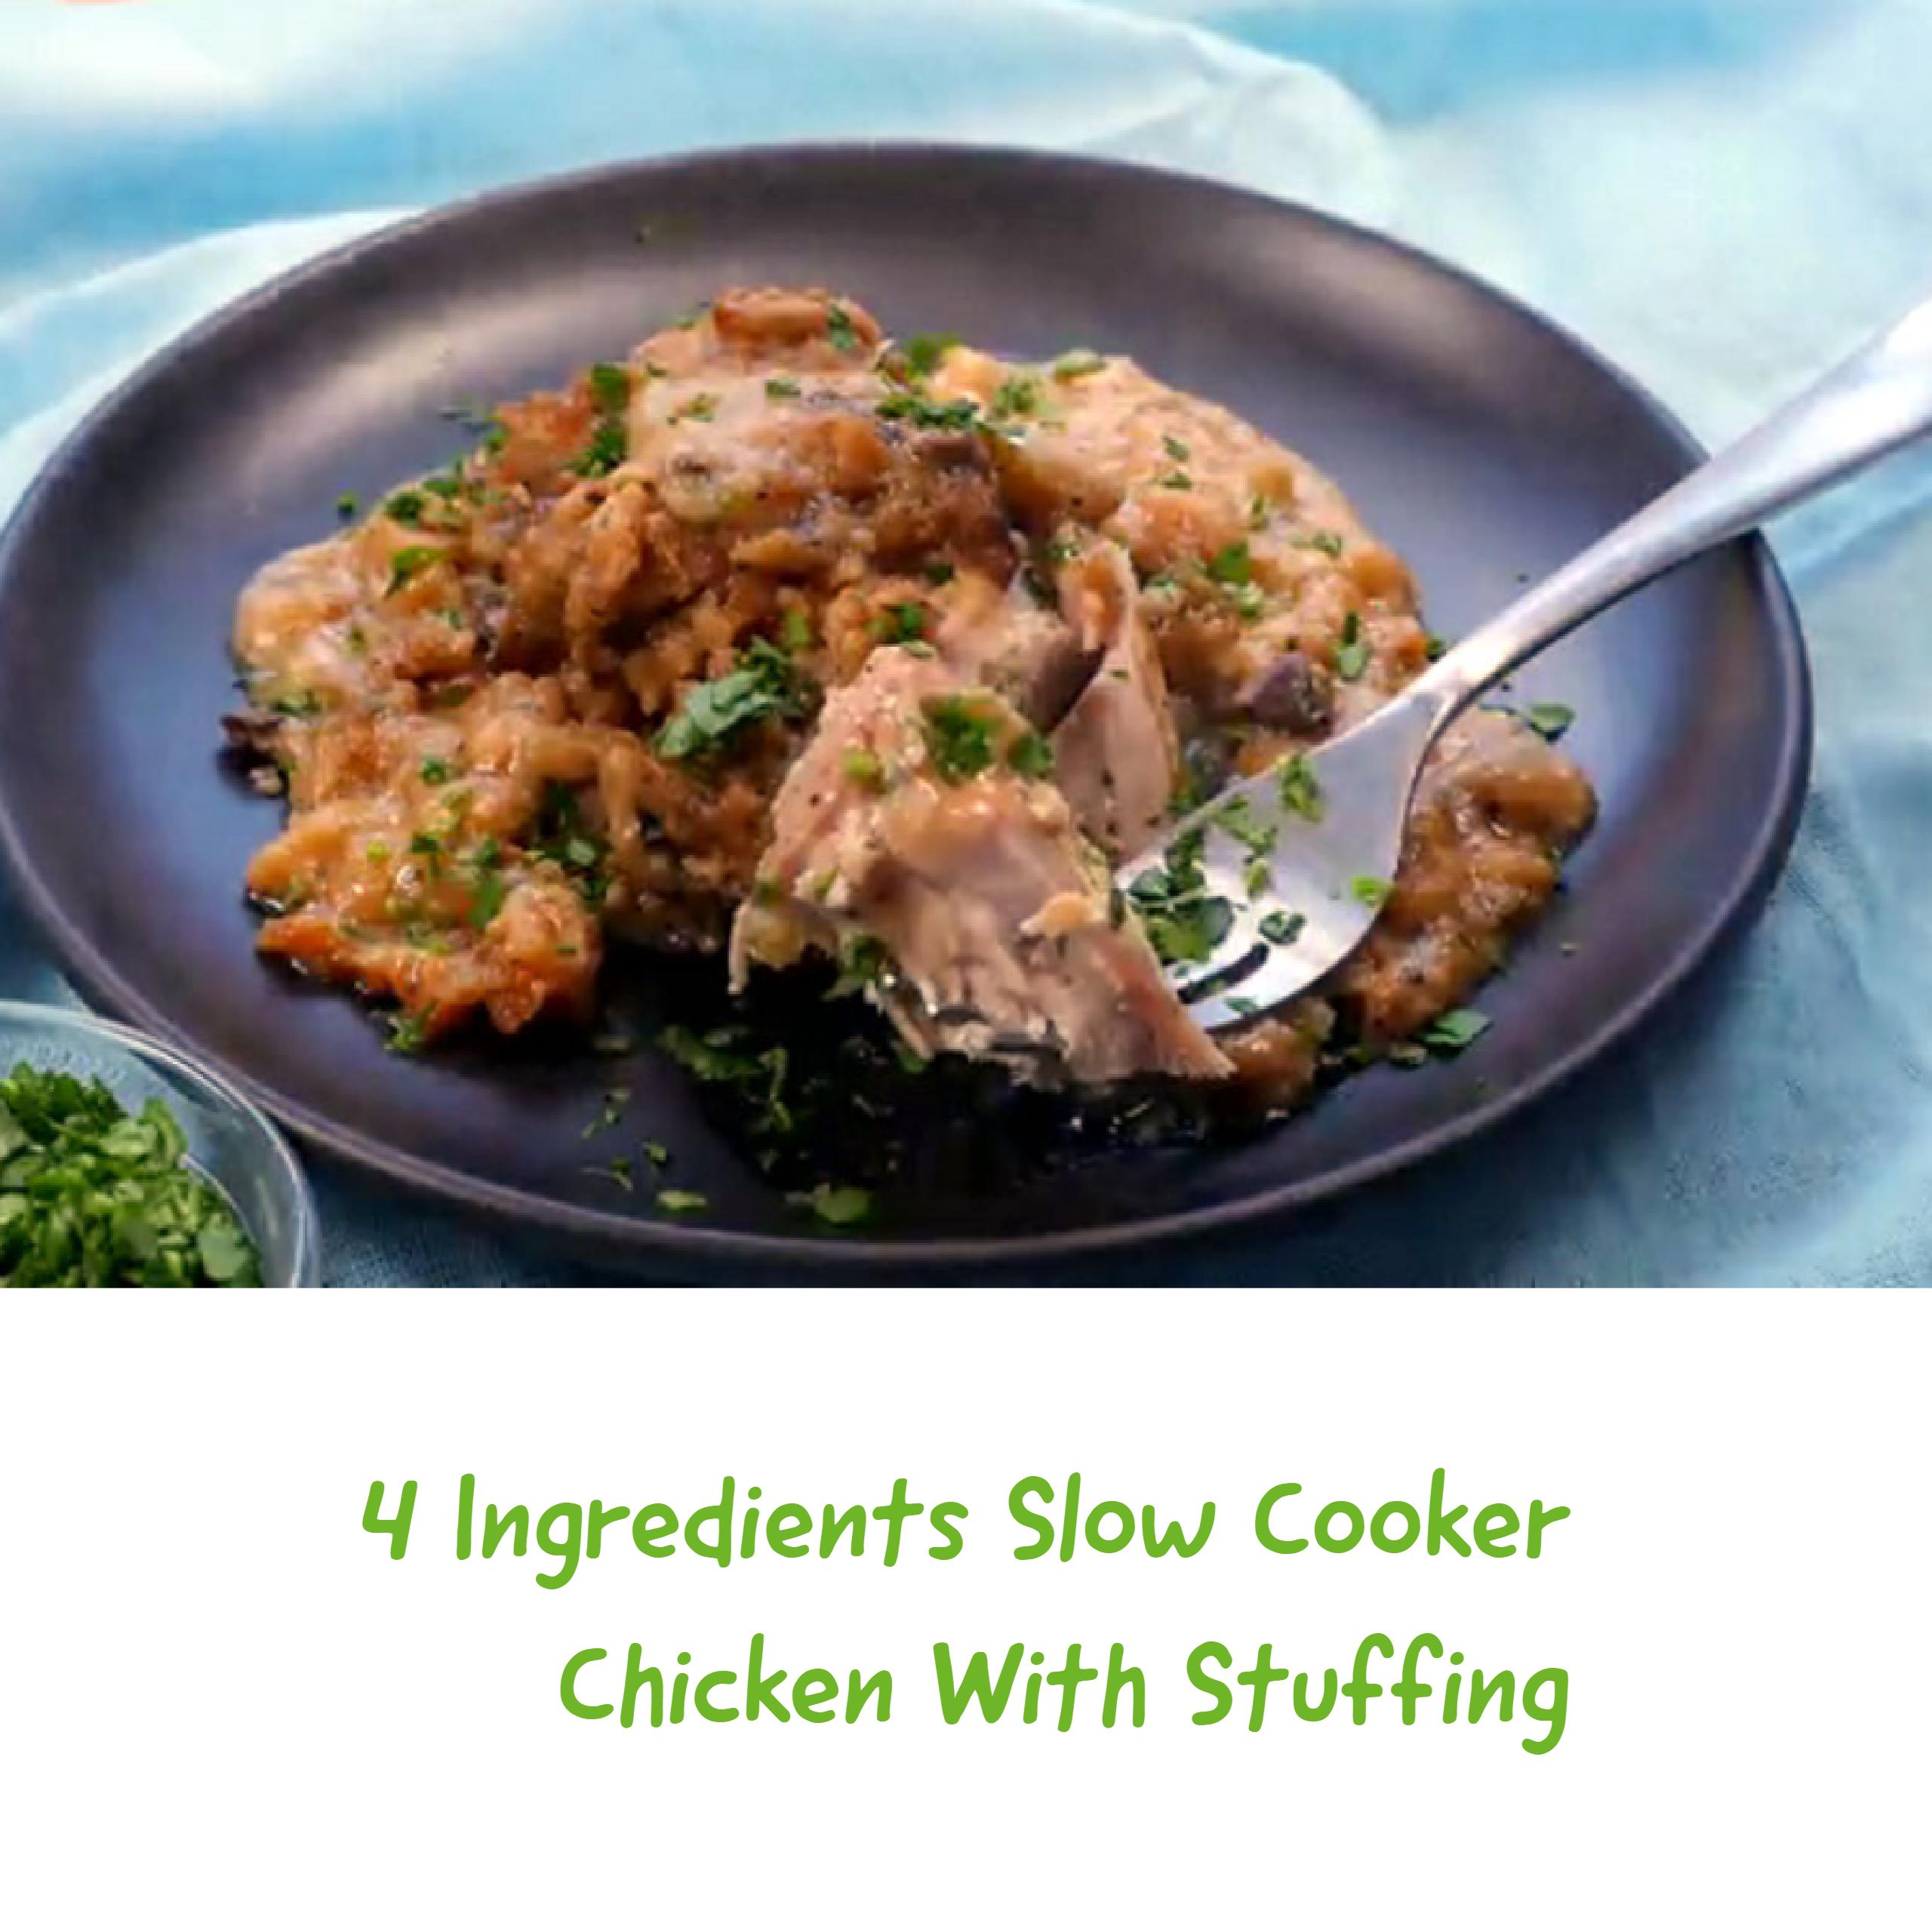 4 Ingredients Slow Cooker Chicken With Stuffing Yummy1